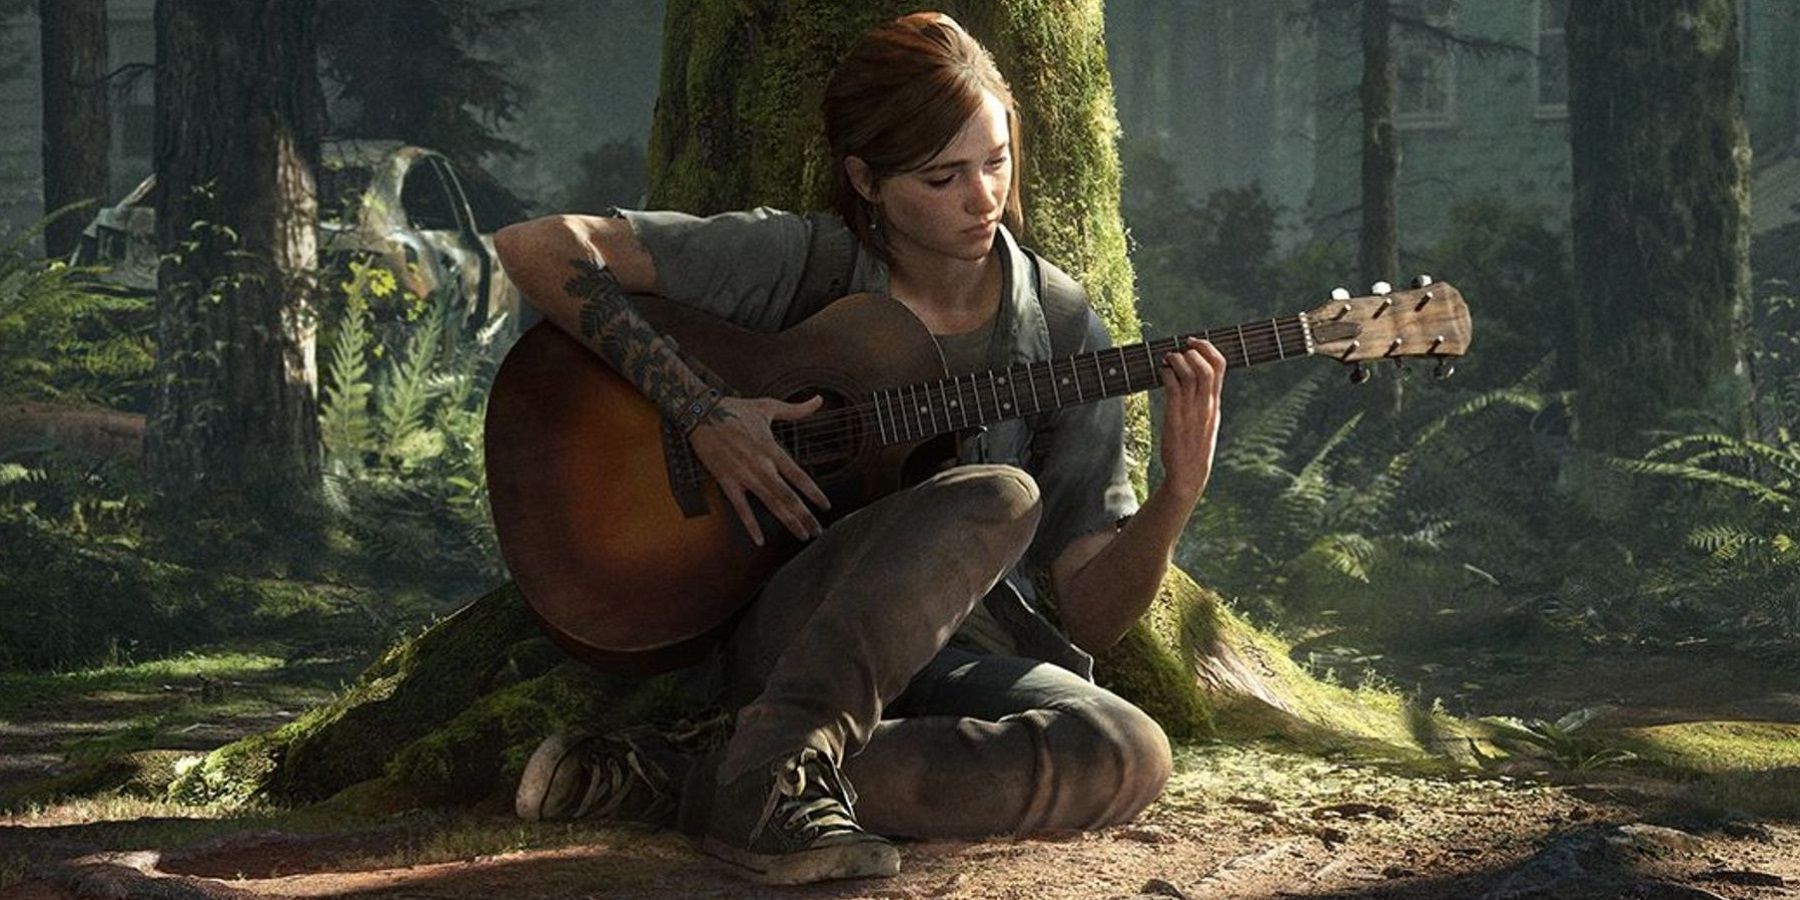 Ellie playing guitar in The Last of Us Part 2